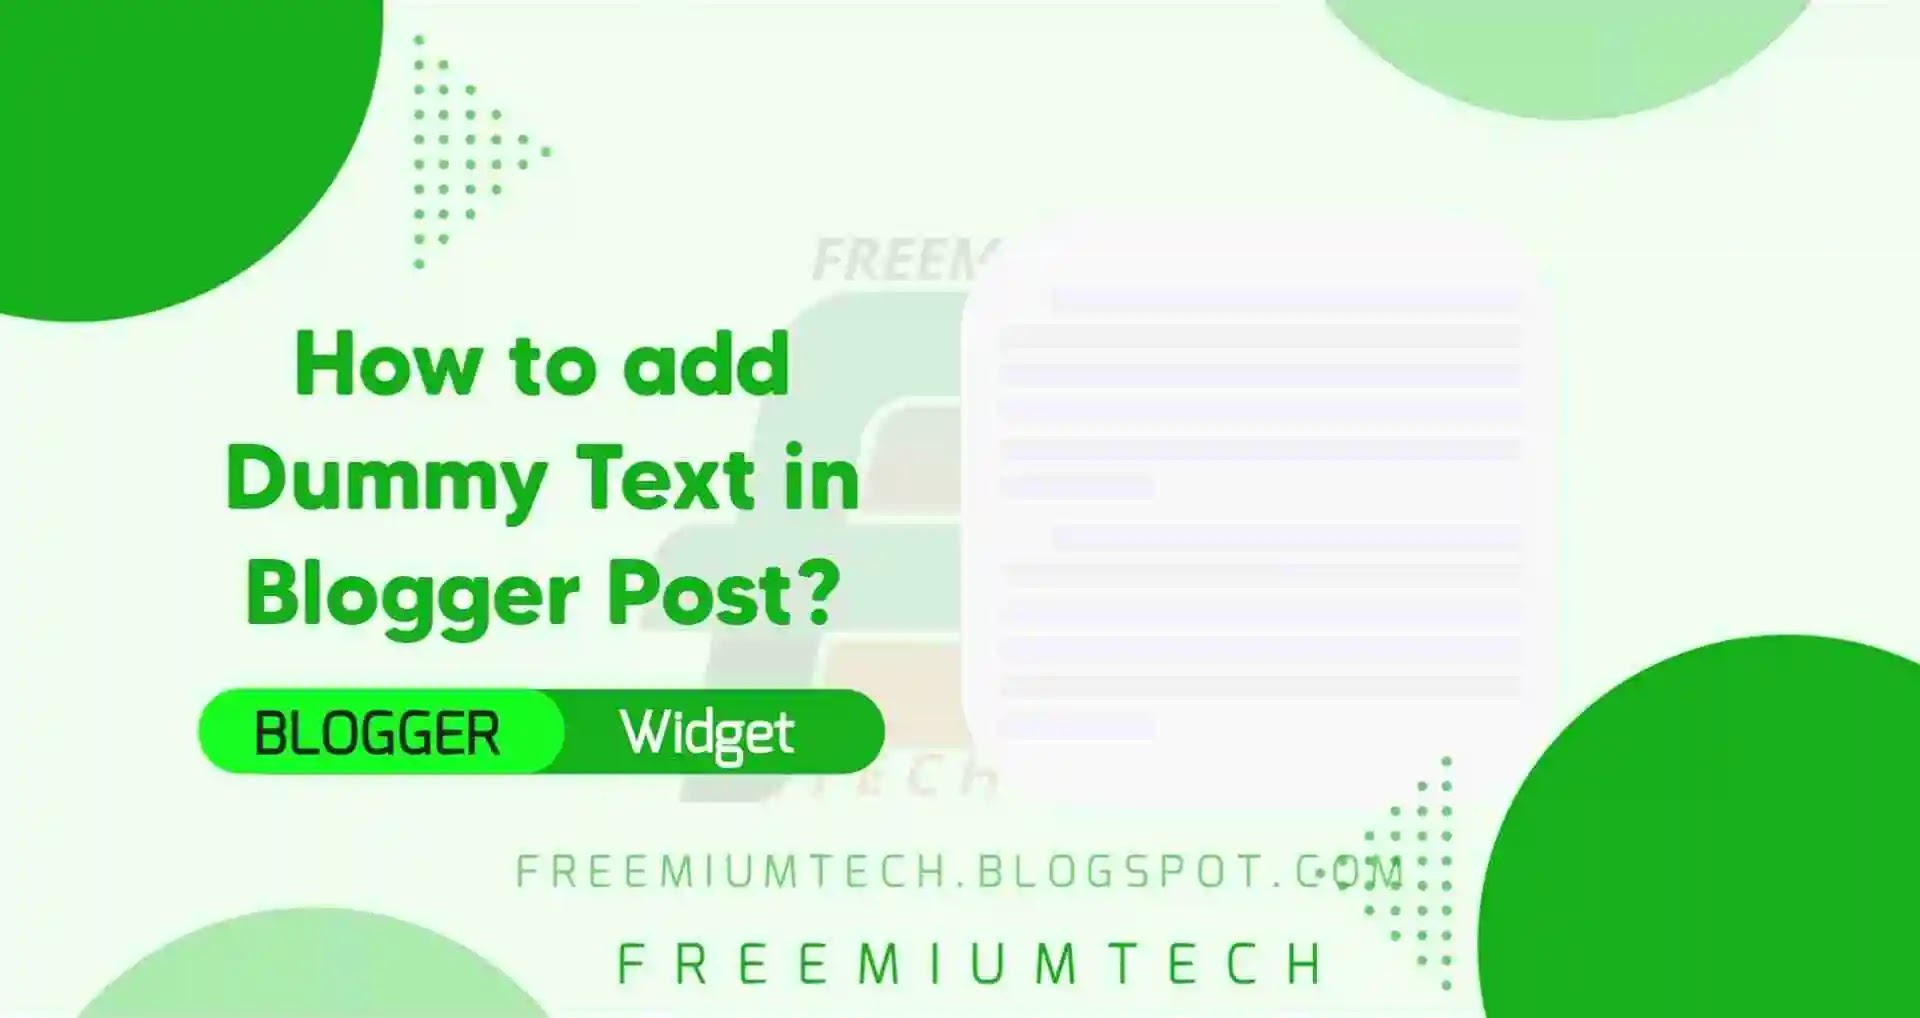 How to add Dummy Text in Blogger Post